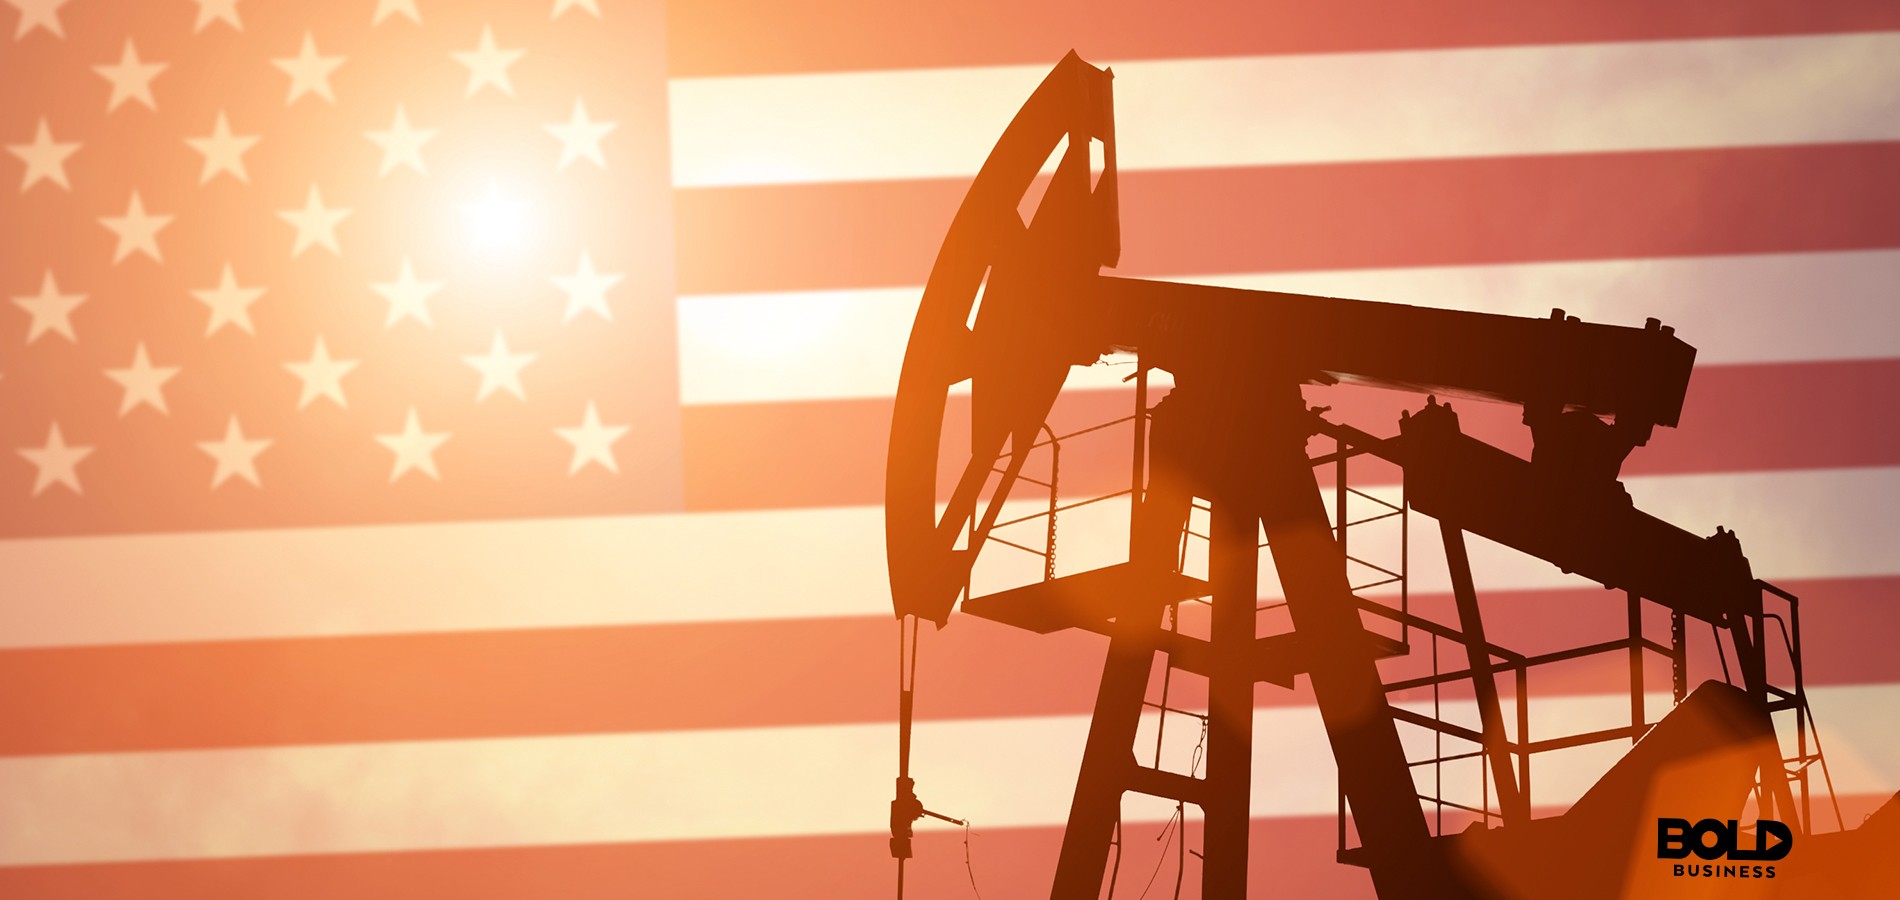 a flag and derrick showing U.S. oil production growth